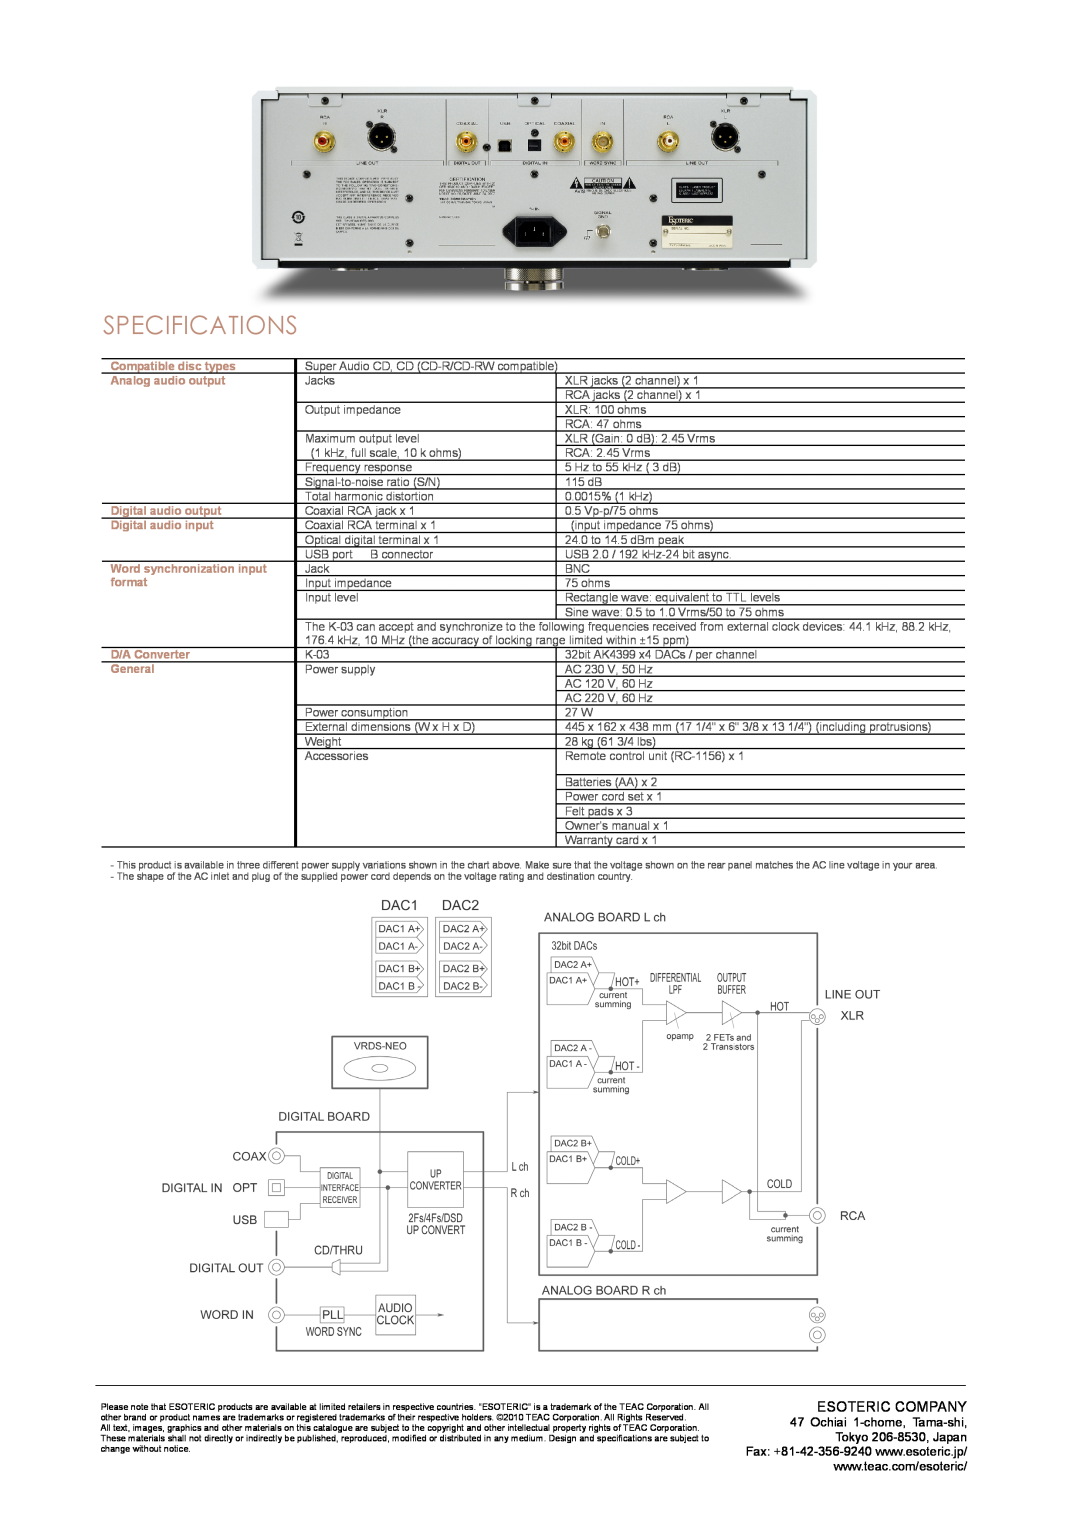 Esoteric K-03 Specifications, Esoteric Company, Compatible disc types, Analog audio output, Digital audio output, format 